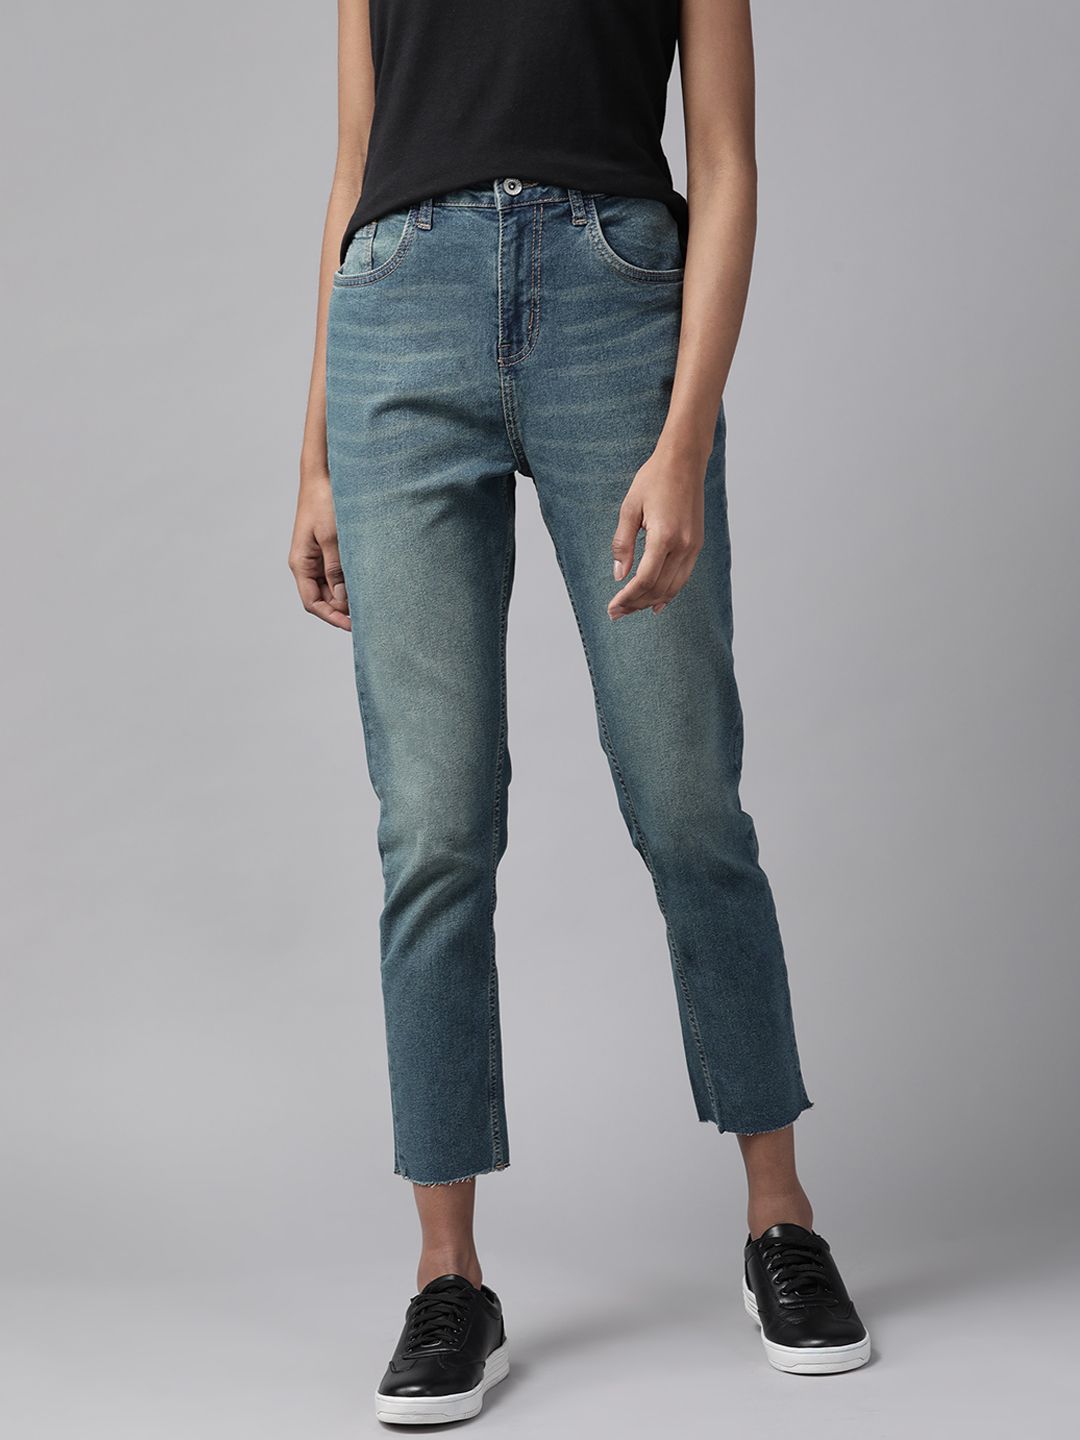 The Roadster Lifestyle Co Women Blue High-Rise Light Fade Stretchable Jeans Price in India